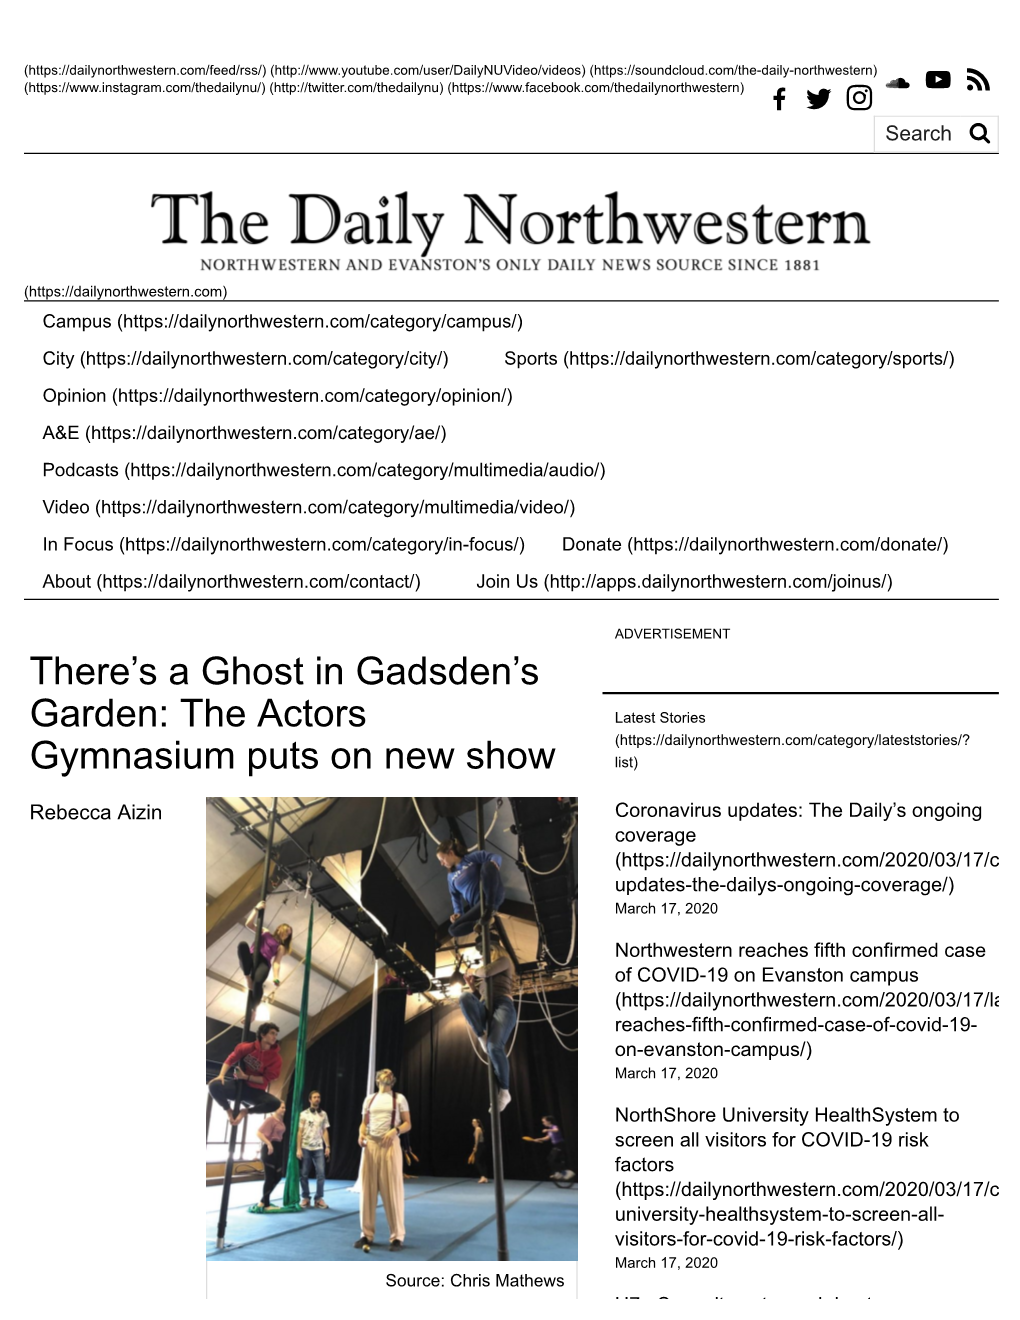 There's a Ghost in Gadsden's Garden: the Actors Gymnasium Puts on New